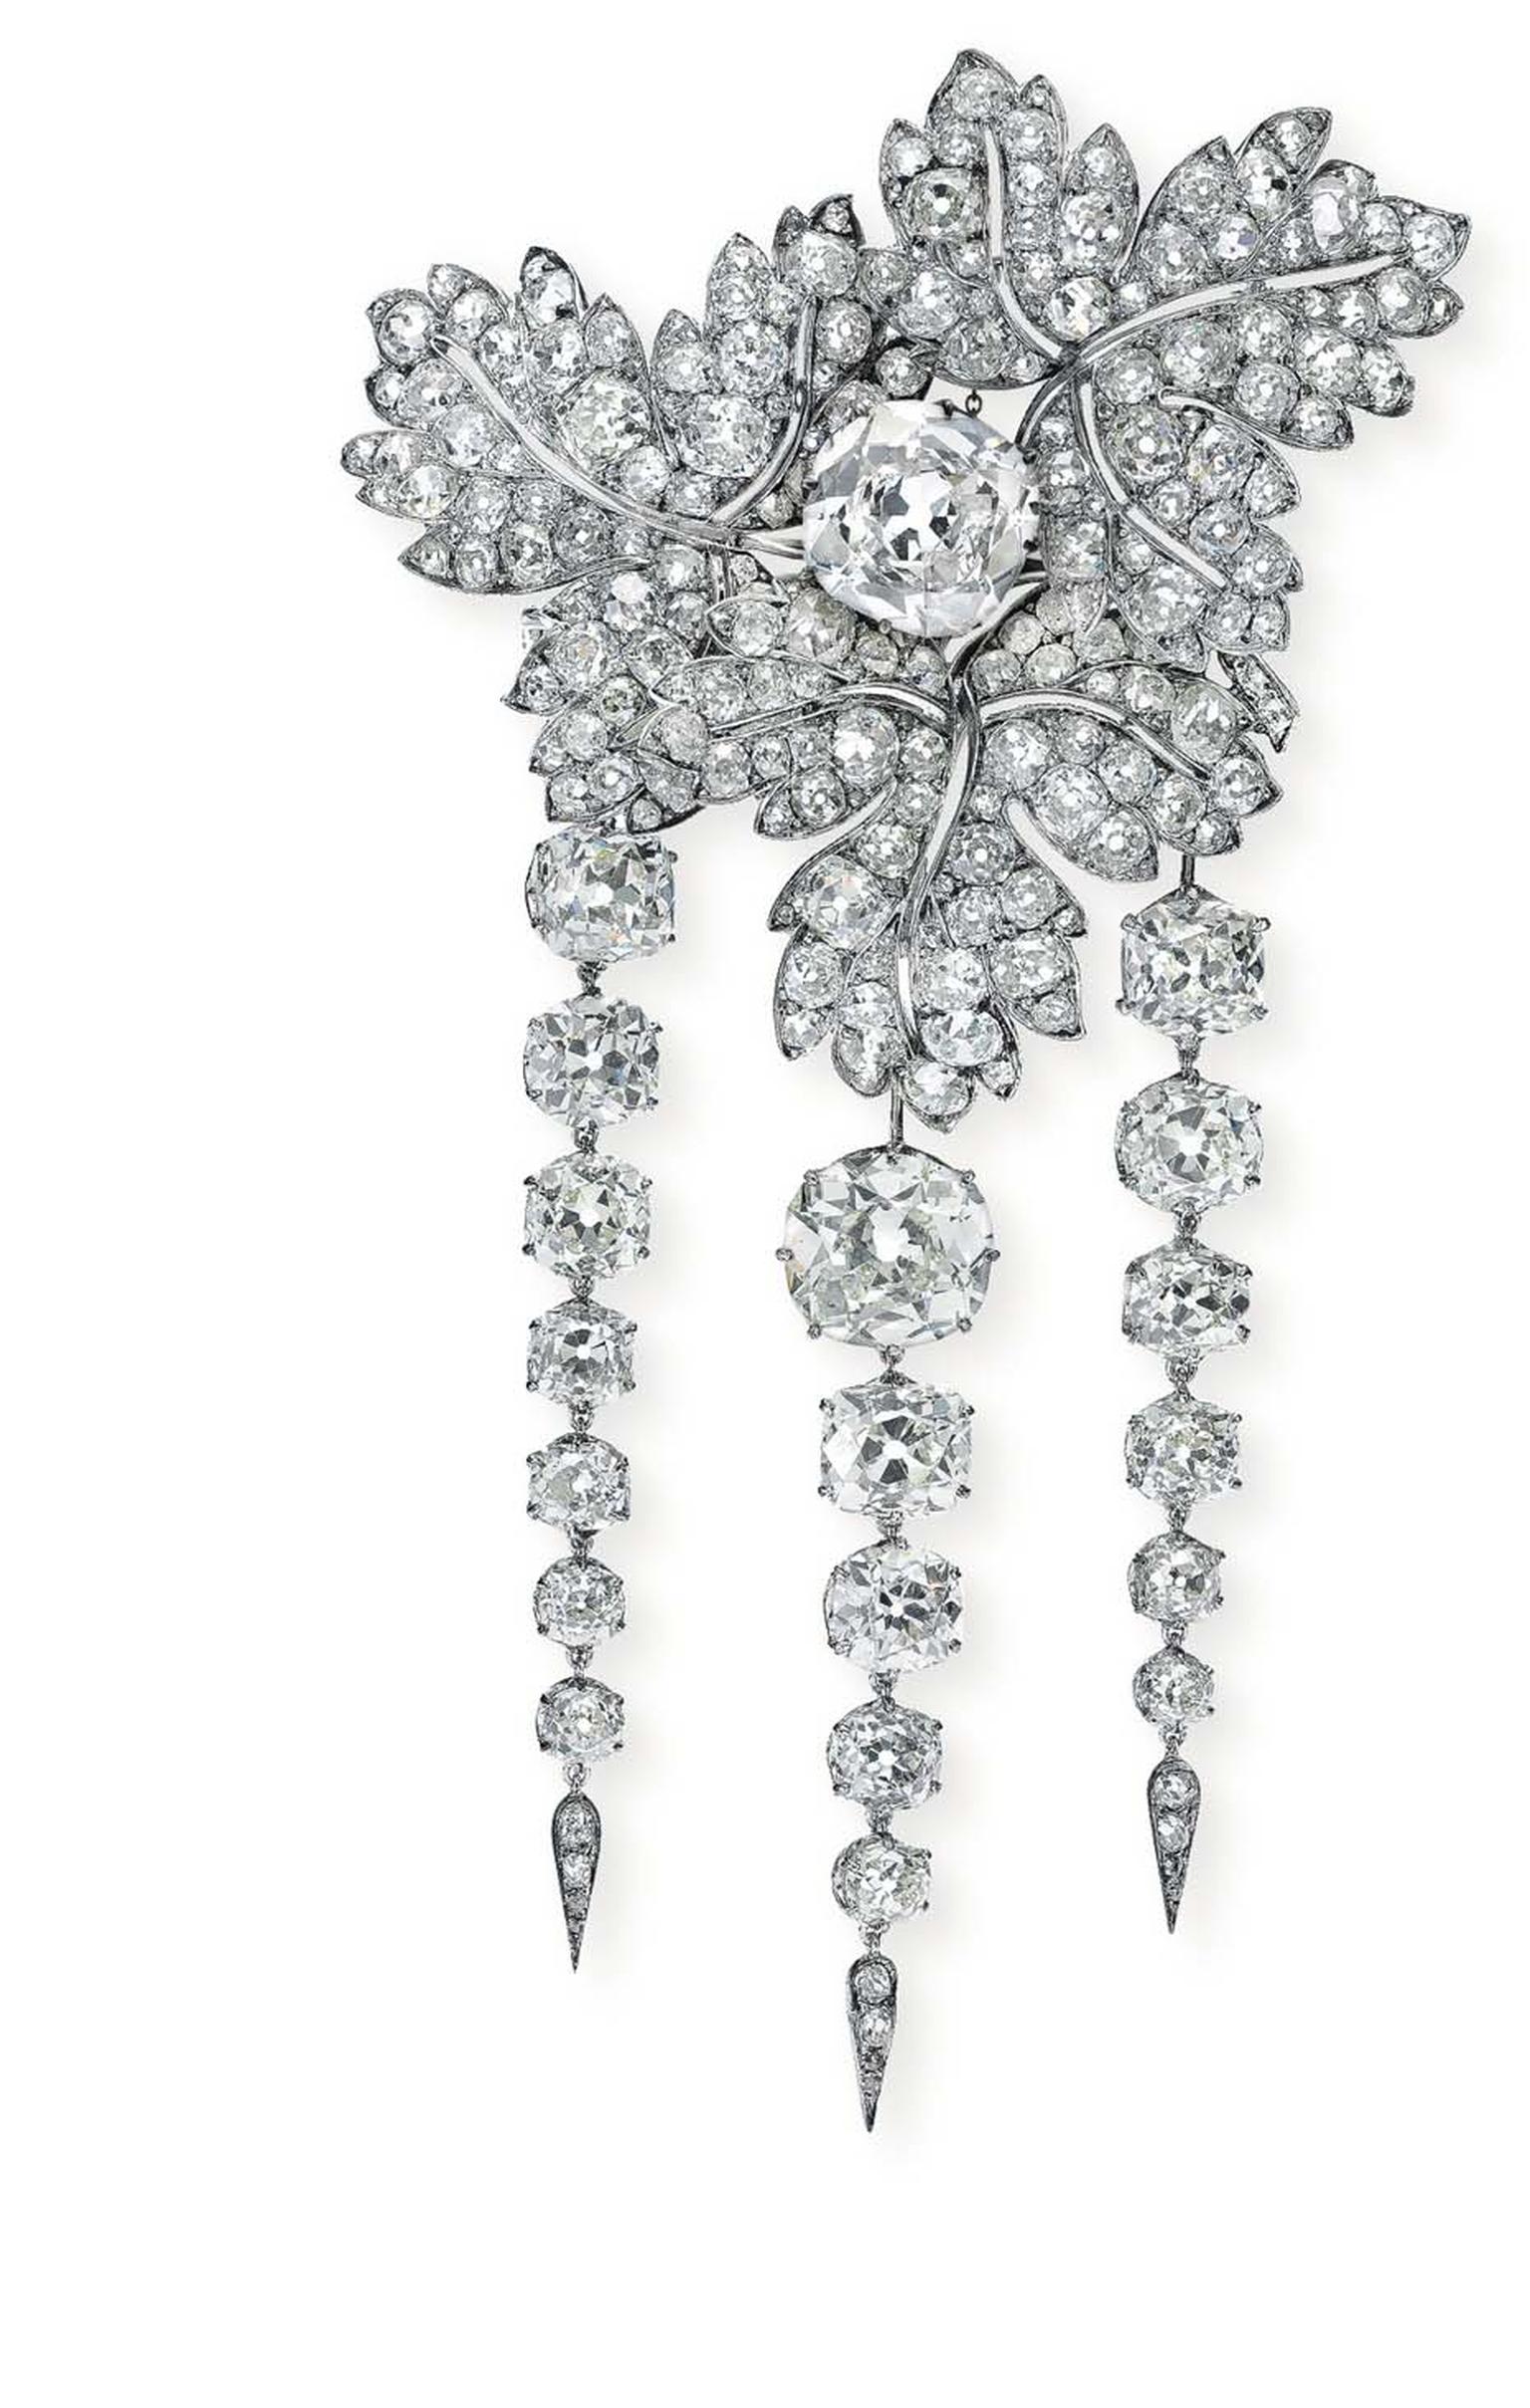 A brooch of royal provenance that belonged to Empress Eugenie of France is  up for auction at Christies Geneva